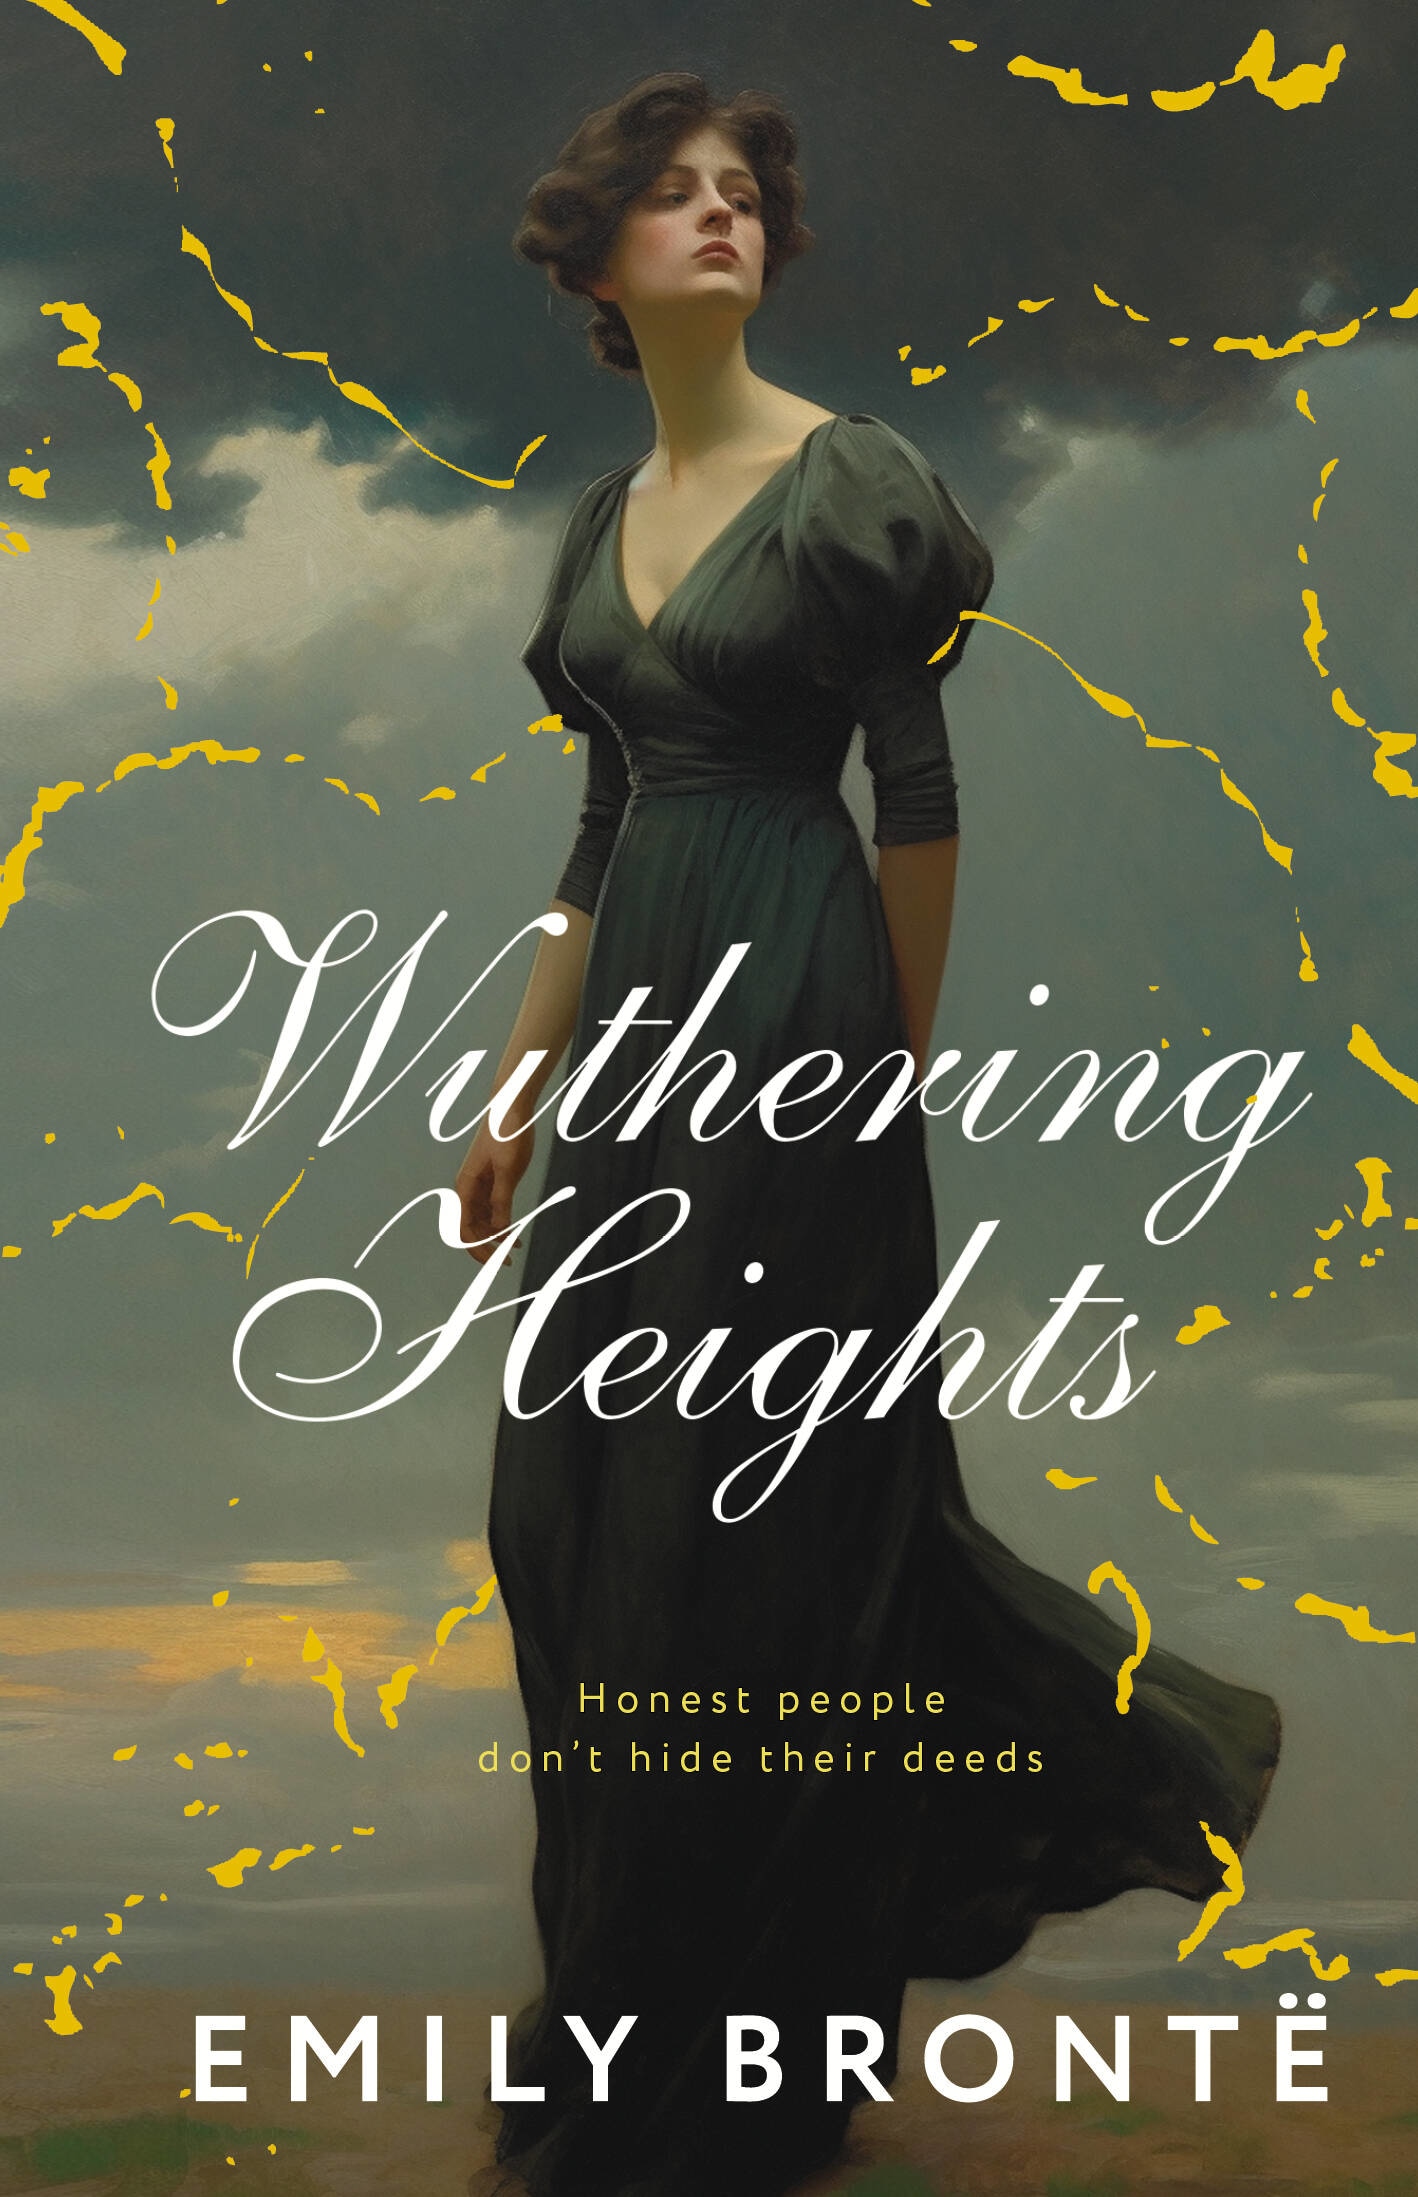 Book “Wuthering Heights” by Эмили Бронте — 2023